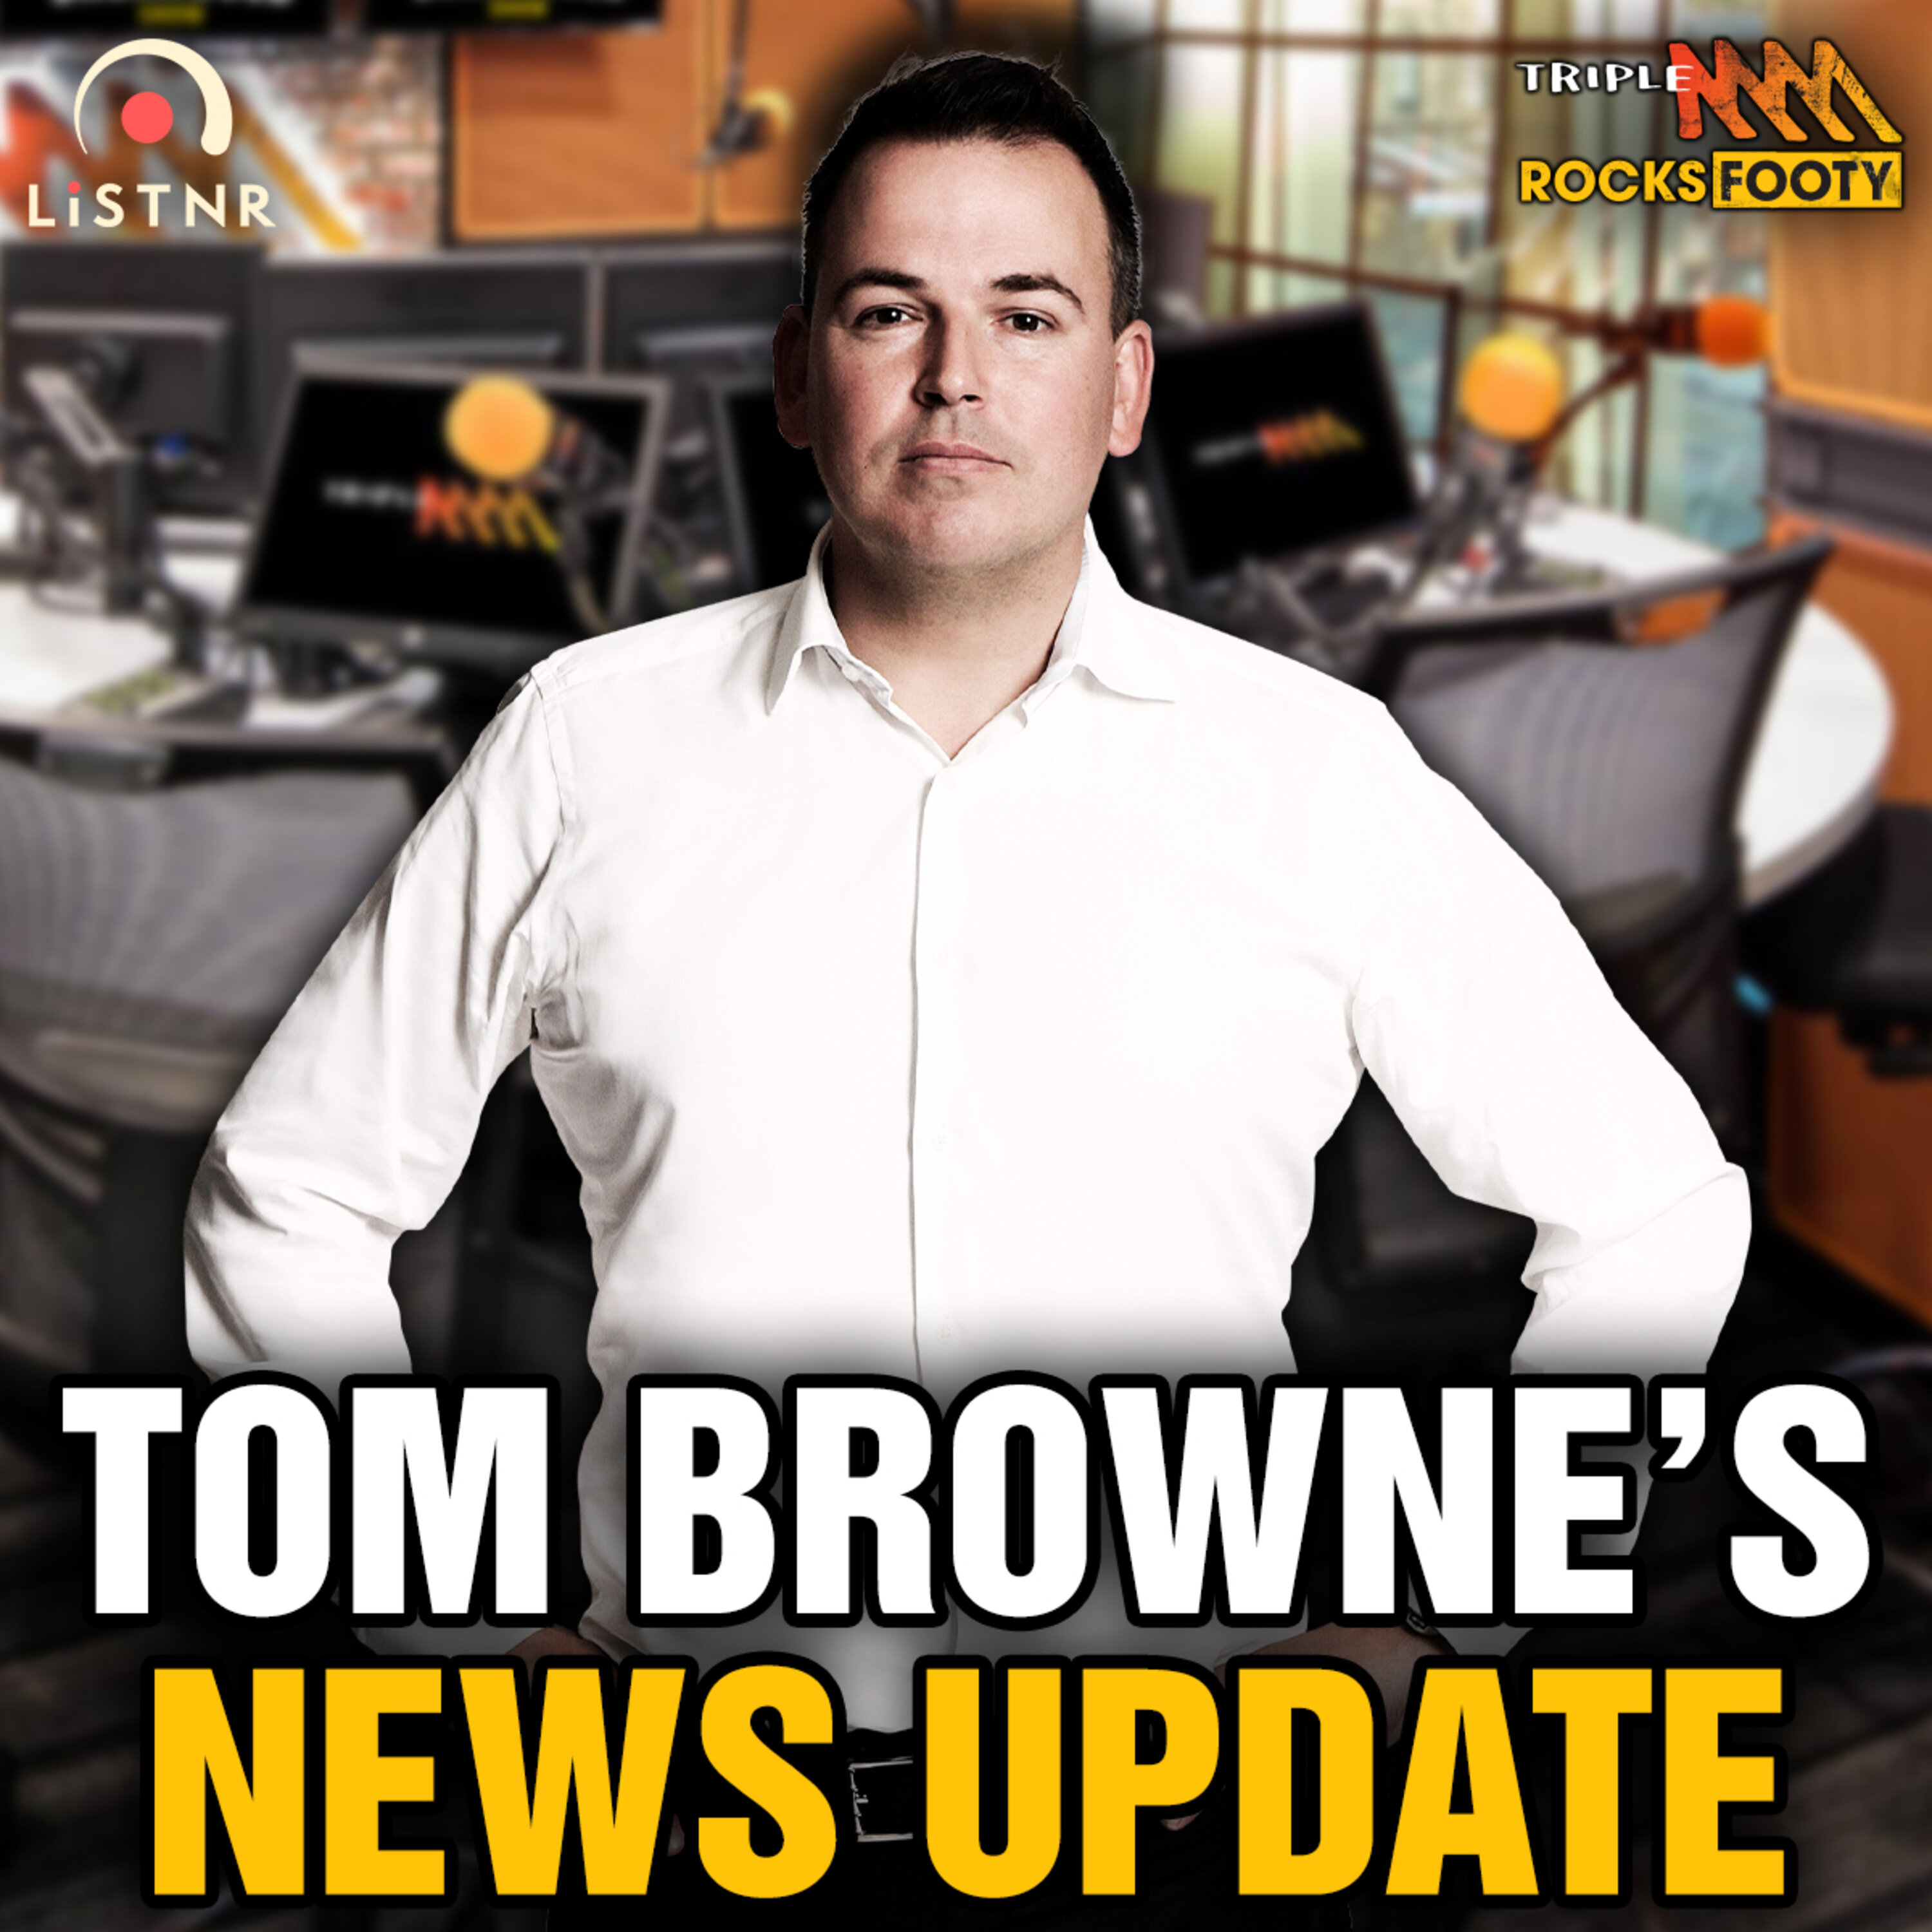 Tom Browne's News | The AFL's memo about coaches umpiring comments, how the new Tasmania team is affecting Olympic sports, round 8 preview